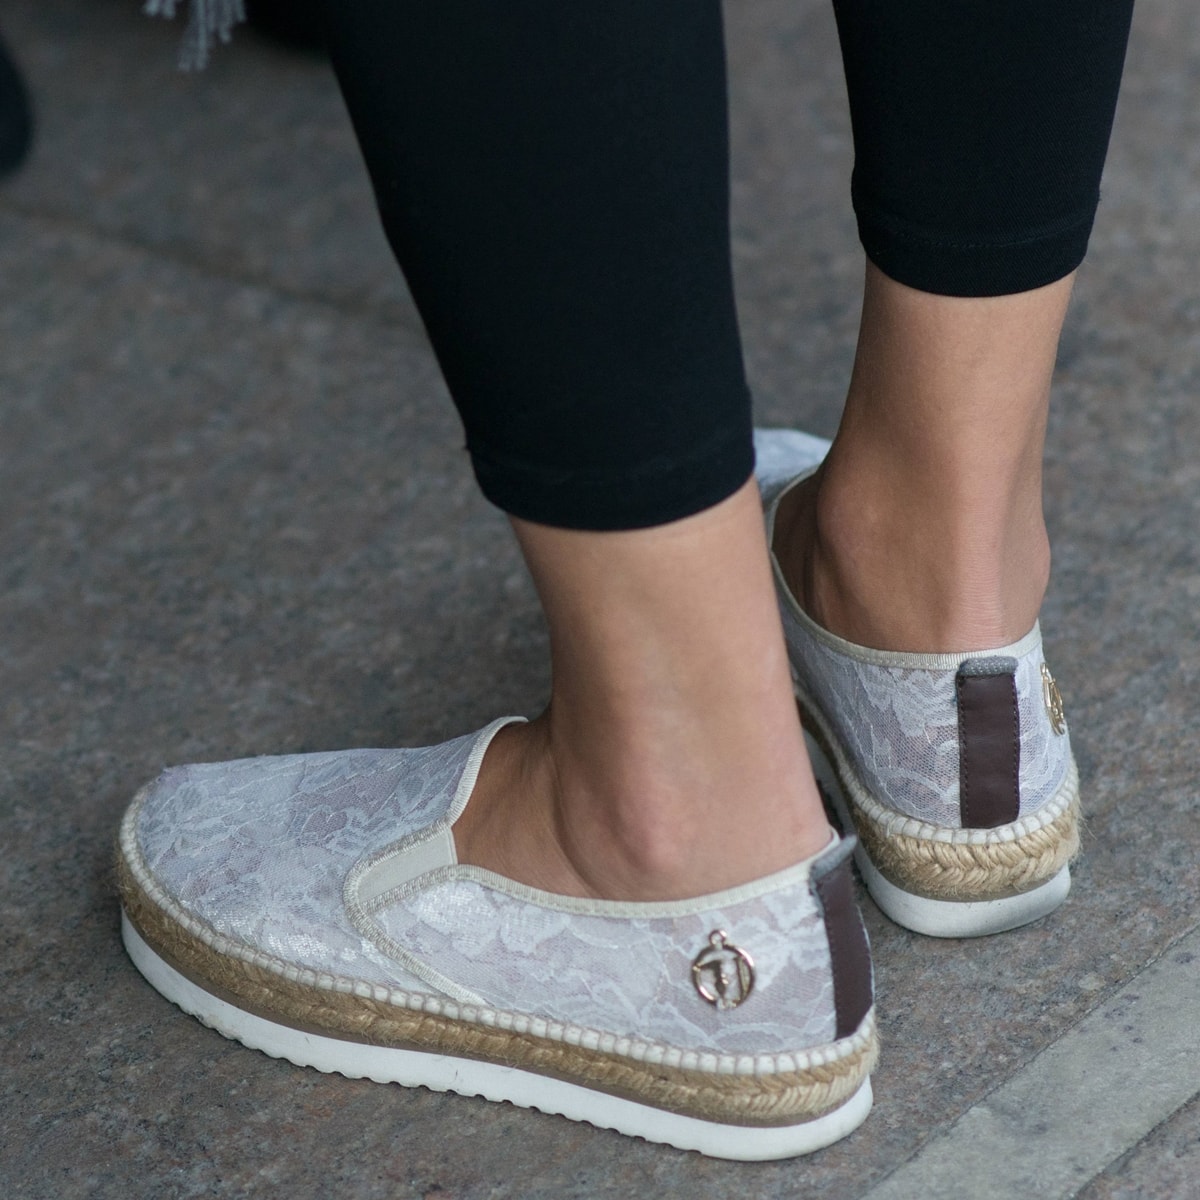 You can make your favorite leggings look chic with a pair of espadrilles